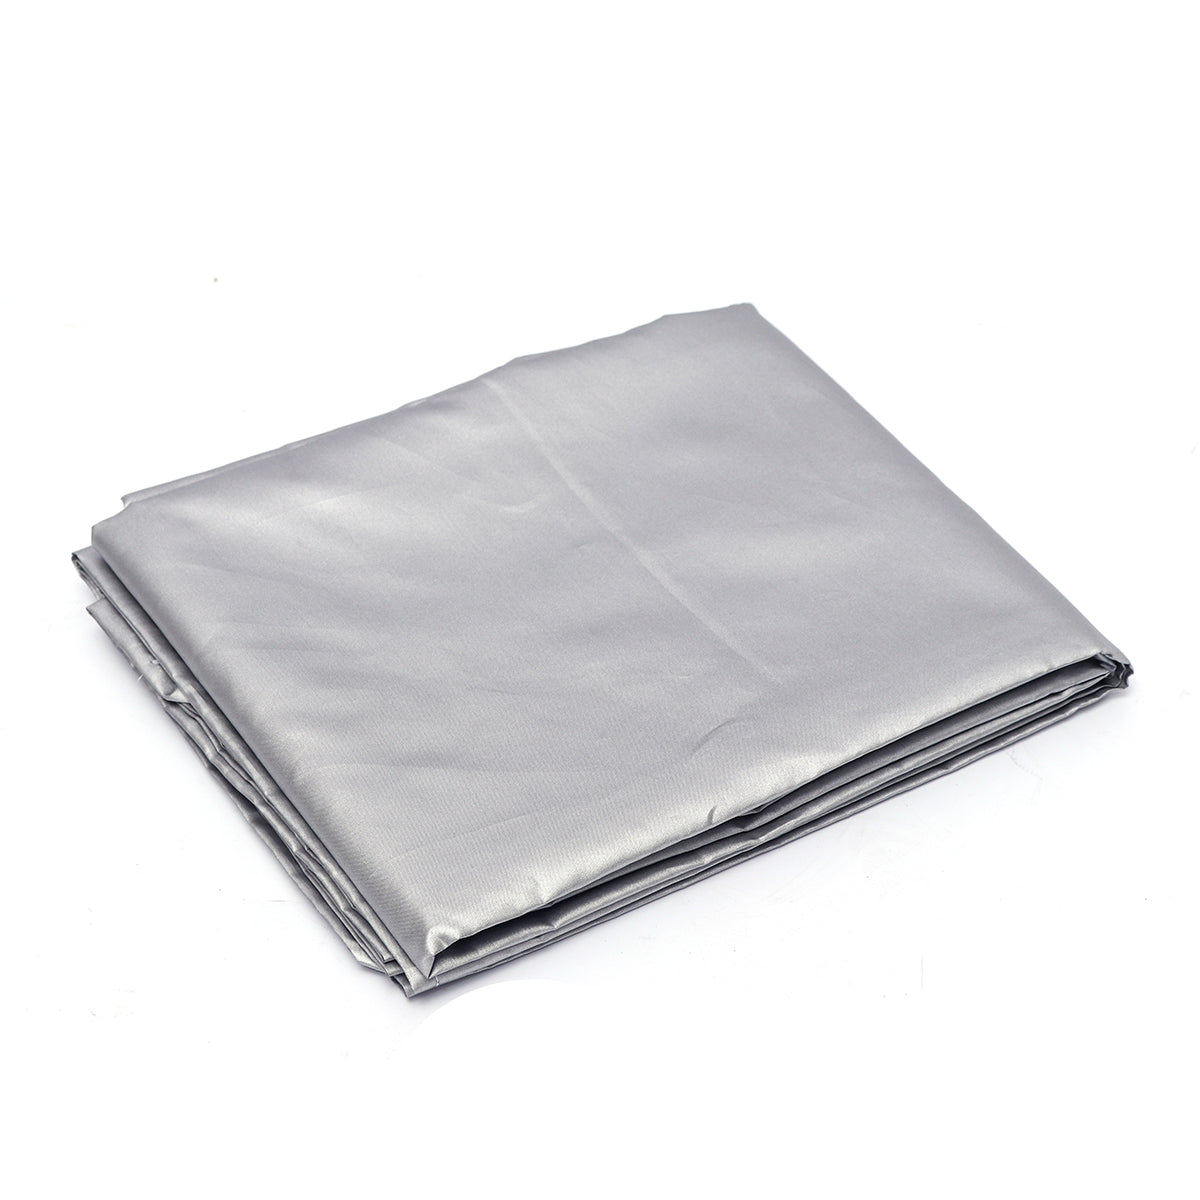 Gray 234x146x178cm Green Car Magnetic Windshield Cover Snow Sun Dust Protector for Pickup SUV